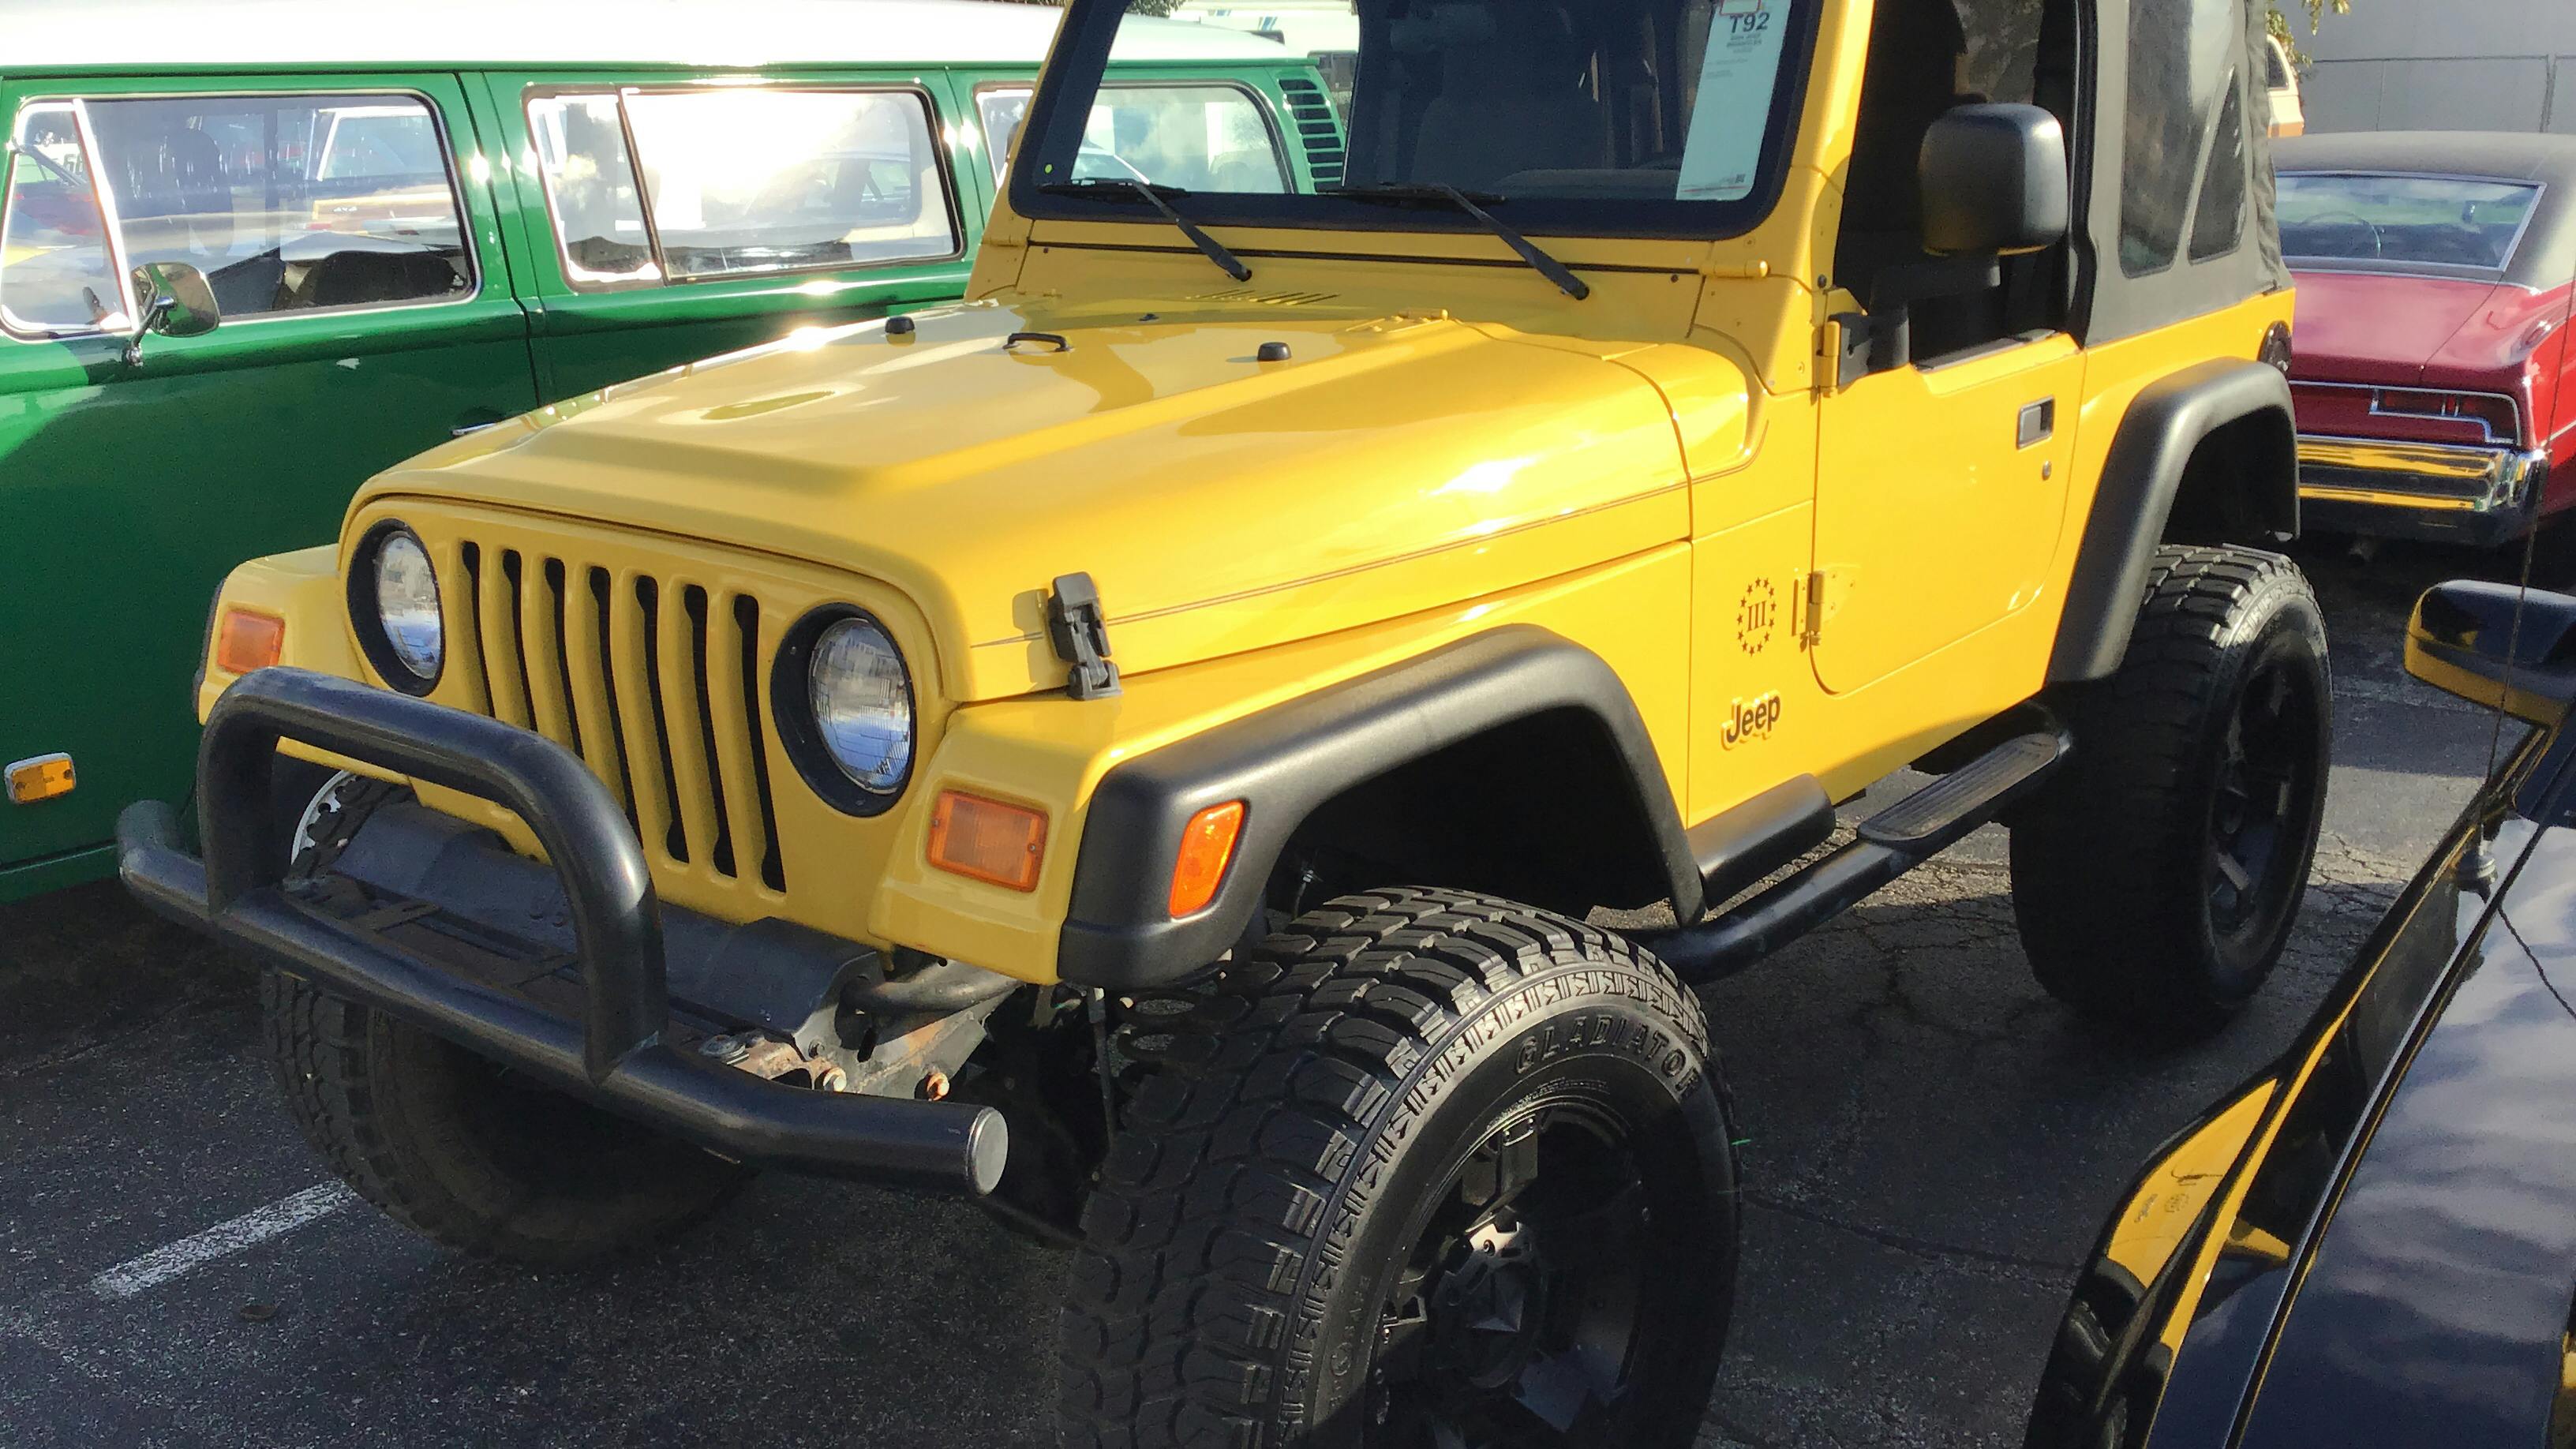 2000 Jeep Wrangler SE | Hagerty Valuation Tools